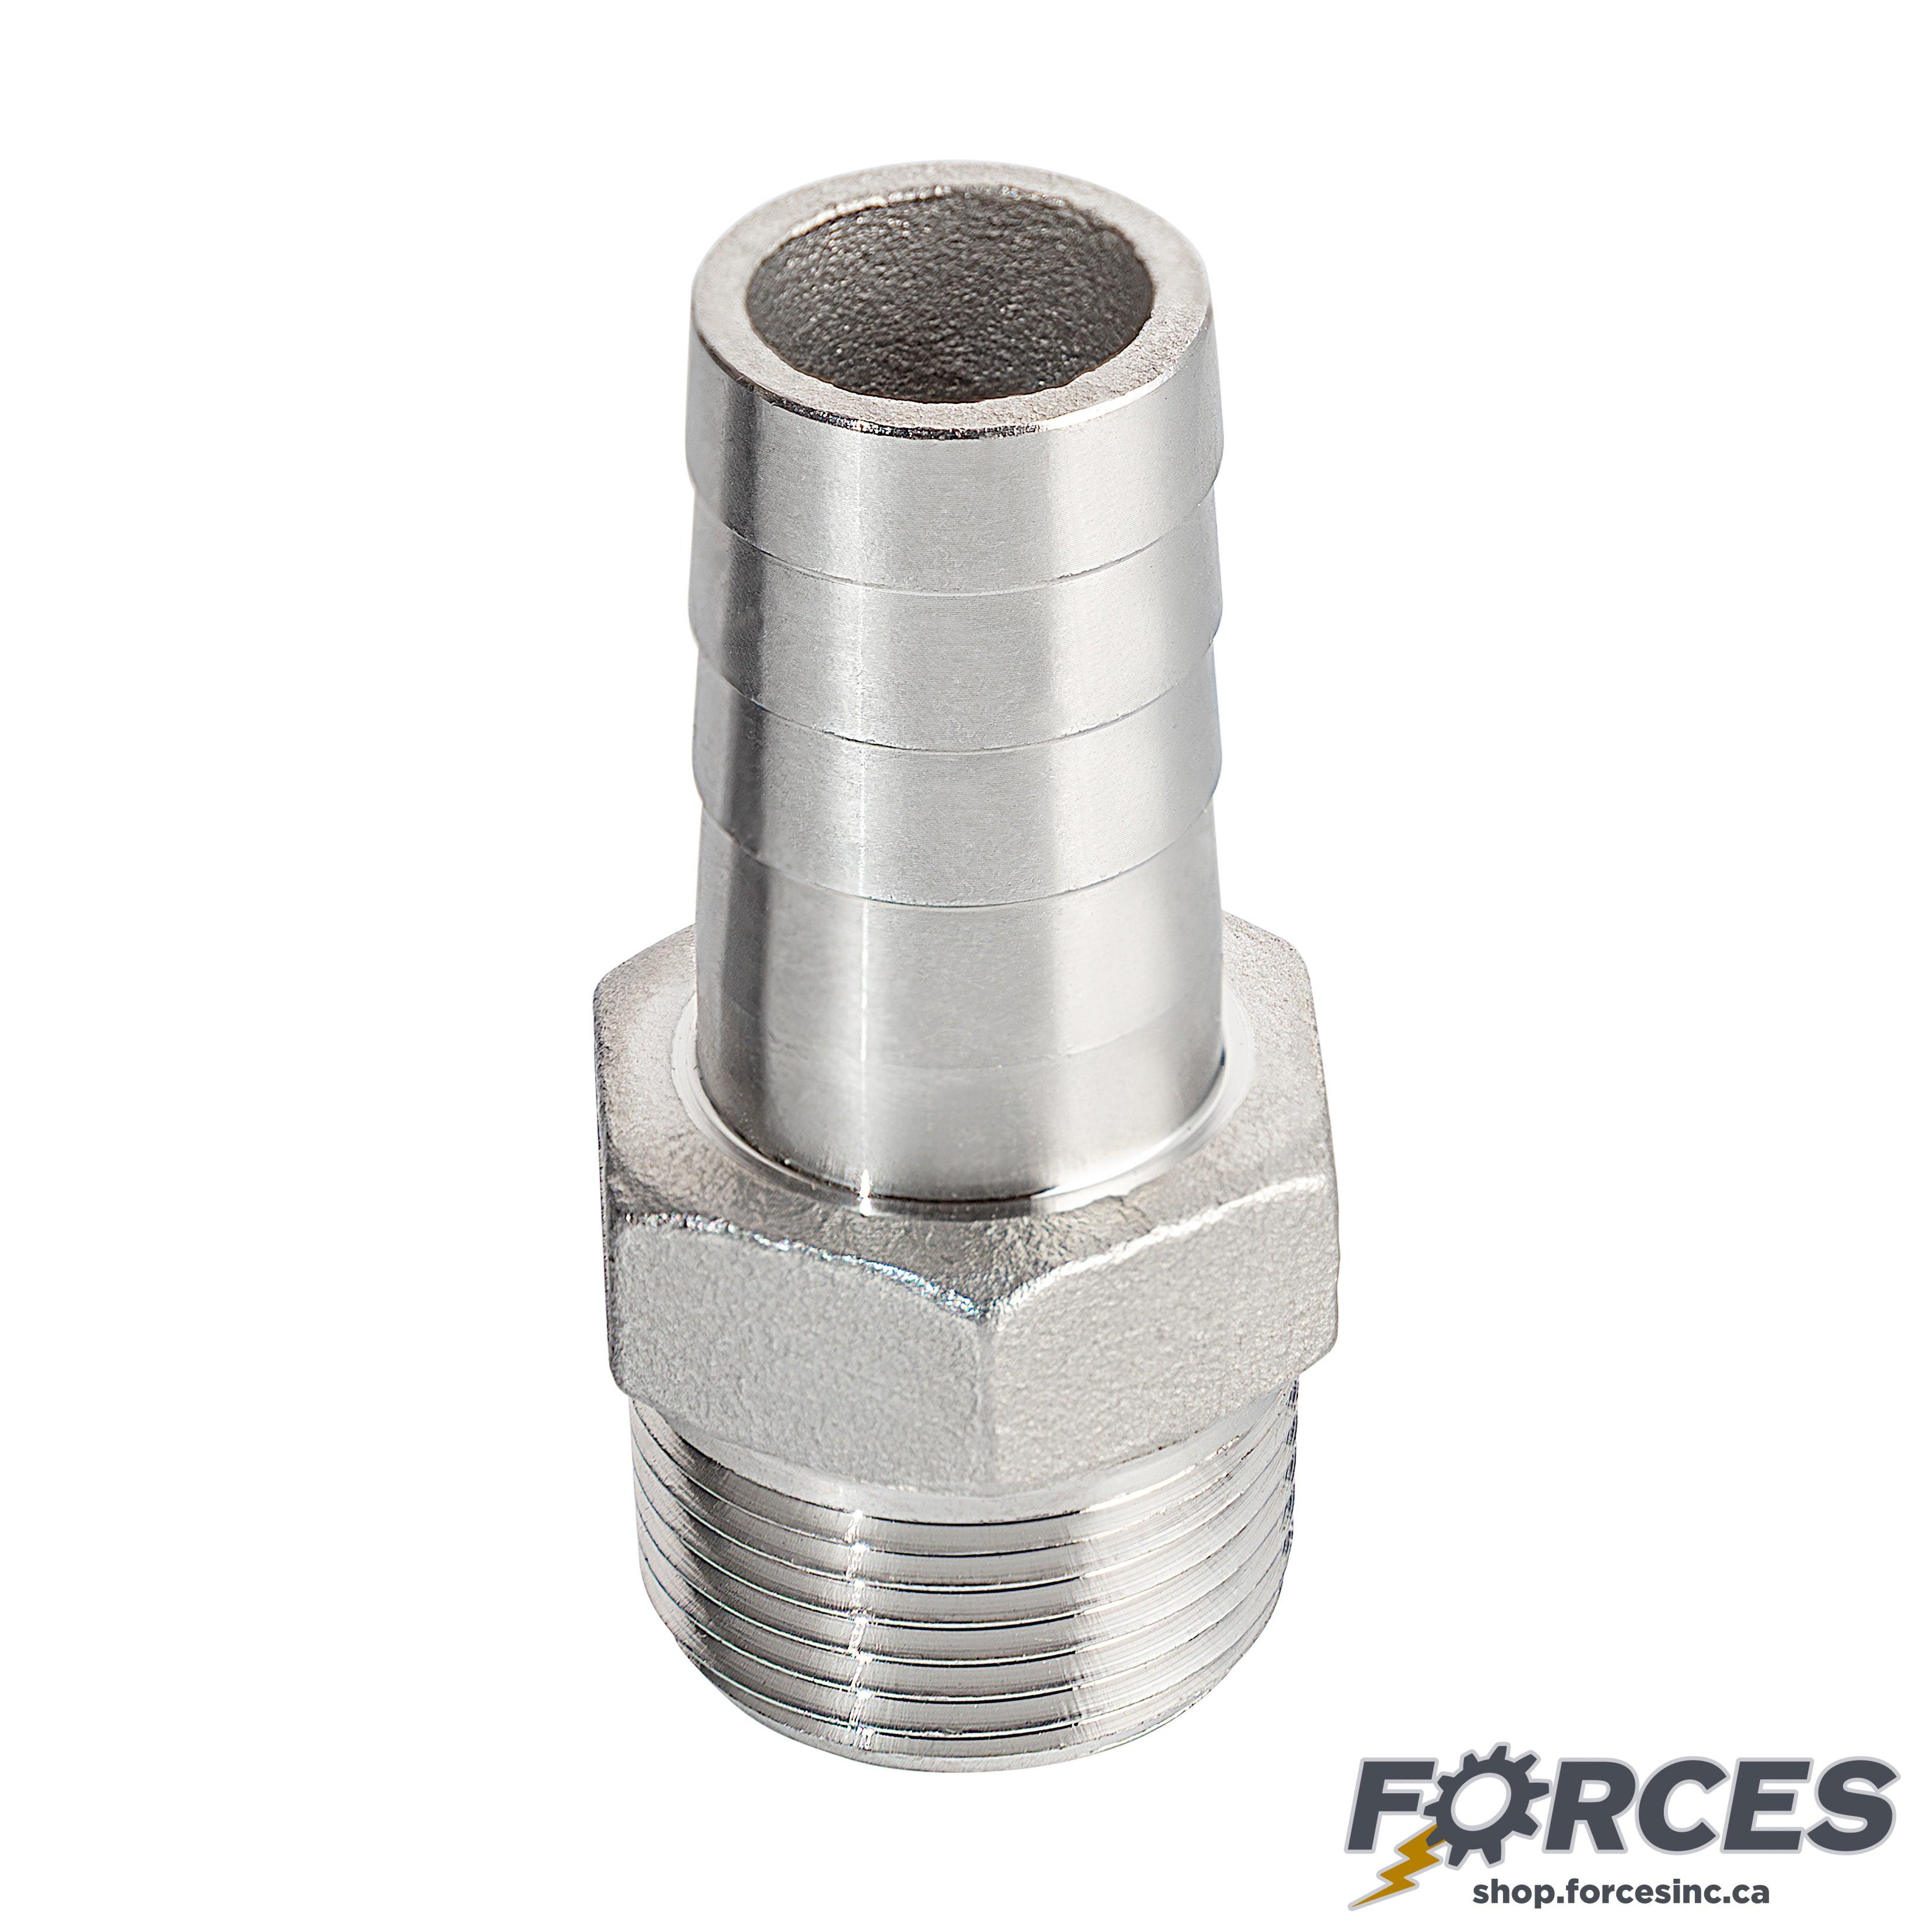 Hose Barb 1" x 1" NPT #150 - Stainless Steel 316 - Forces Inc